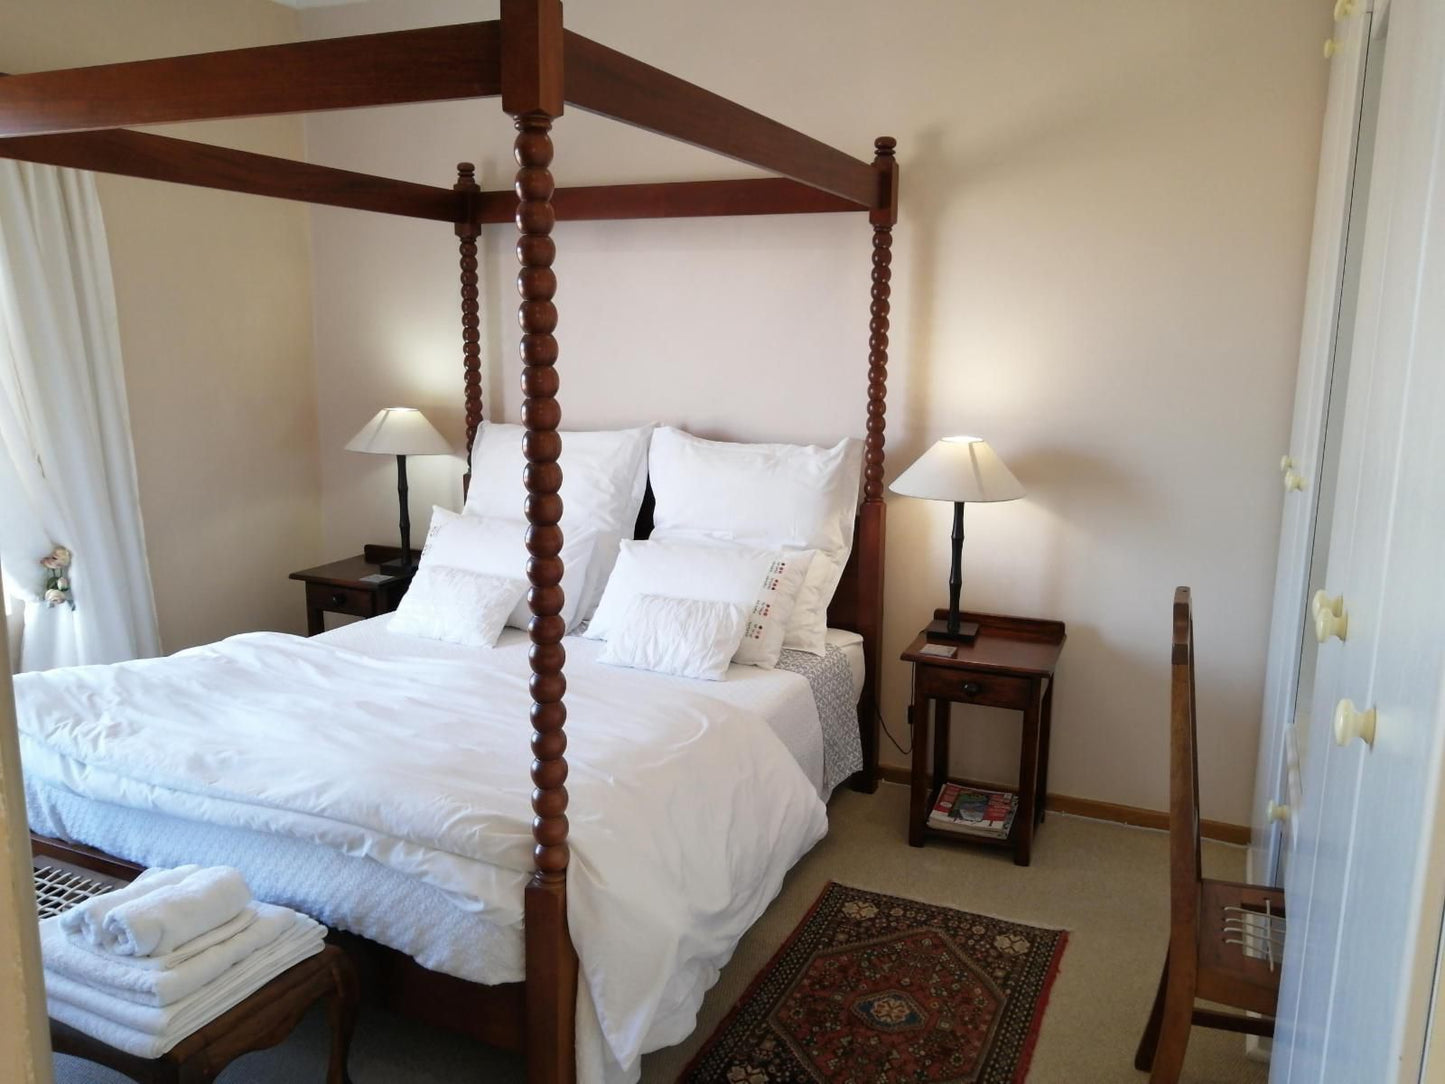 At 29 Columba Great Brak River Western Cape South Africa Bedroom